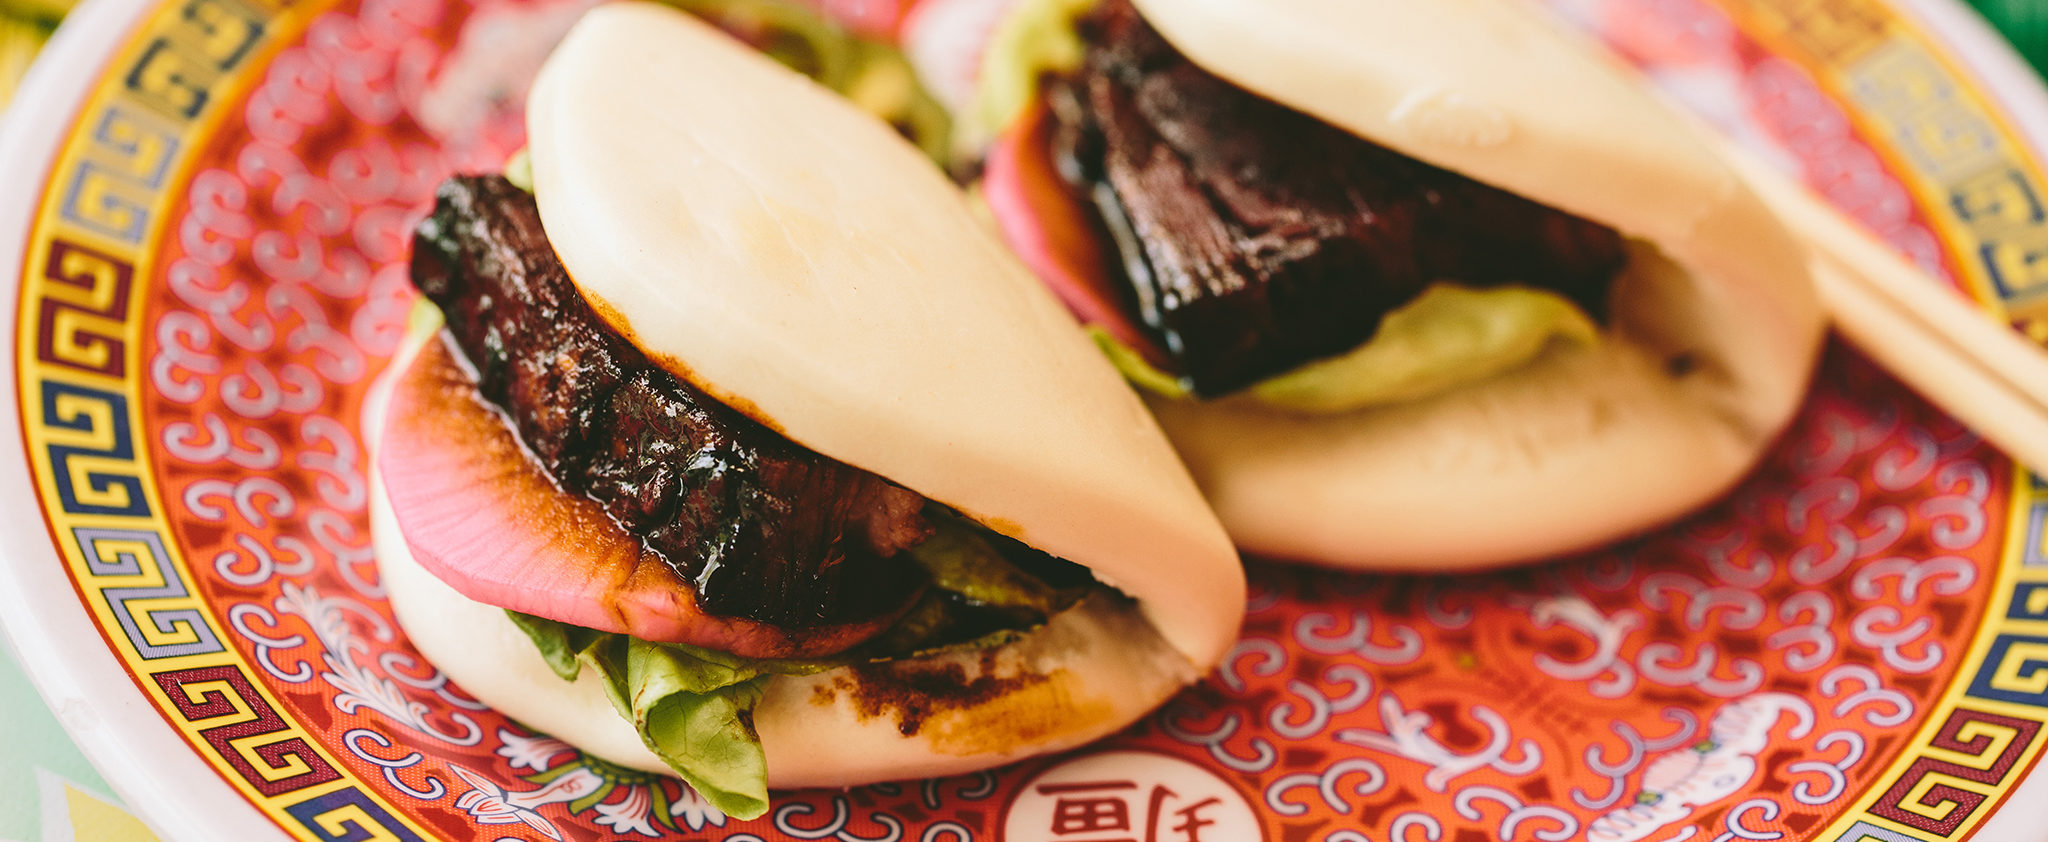 Pork belly buns from Myers + Chang